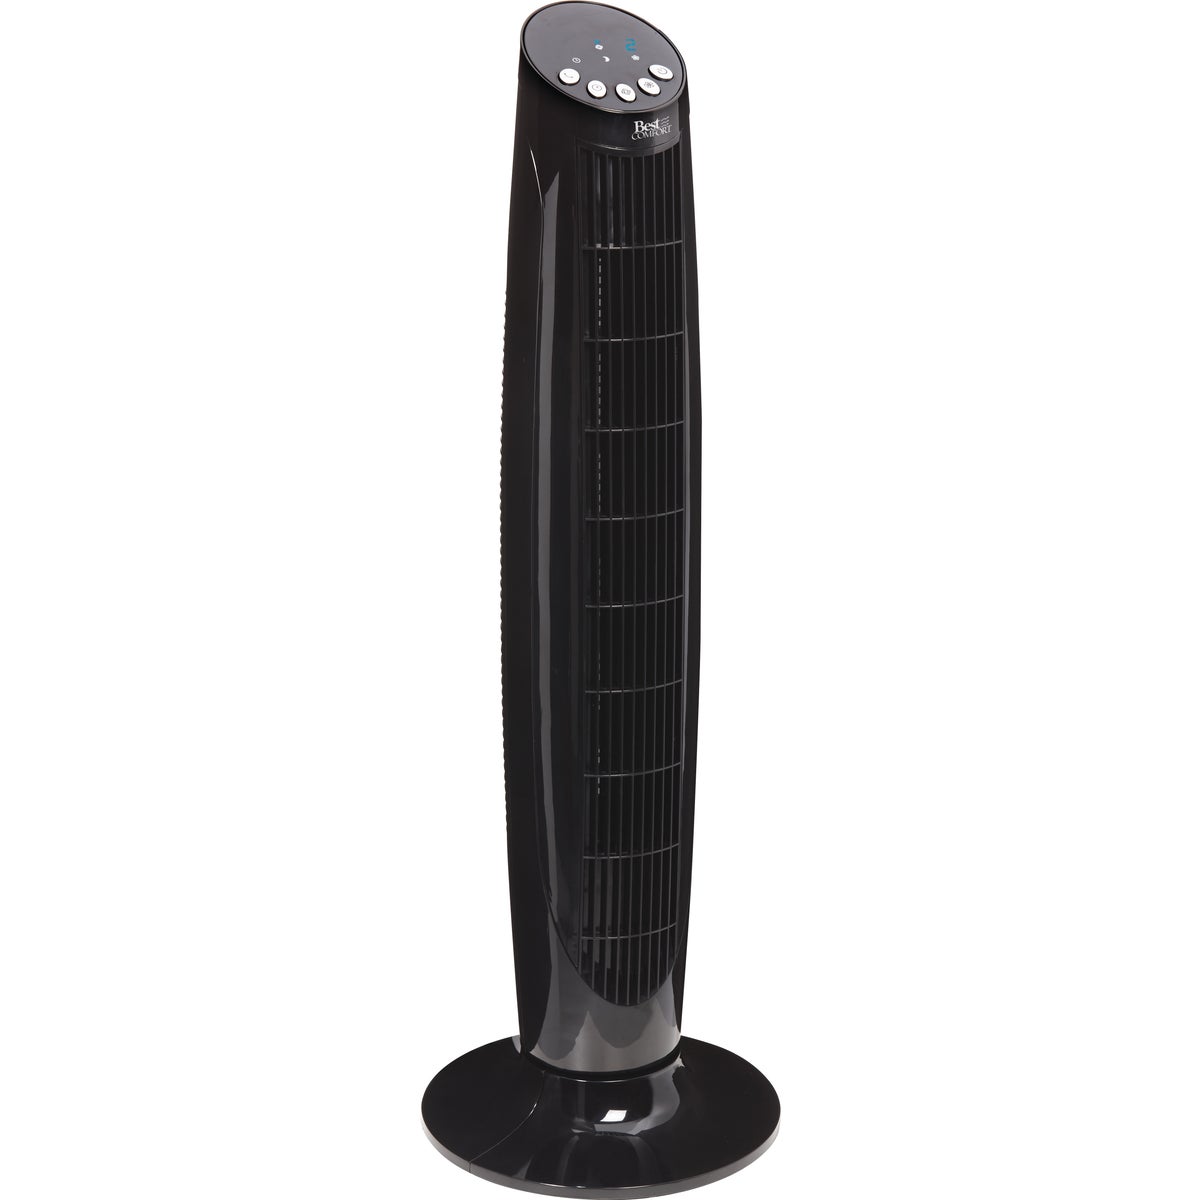 Item 502396, 36-inch tower fan with remote control.